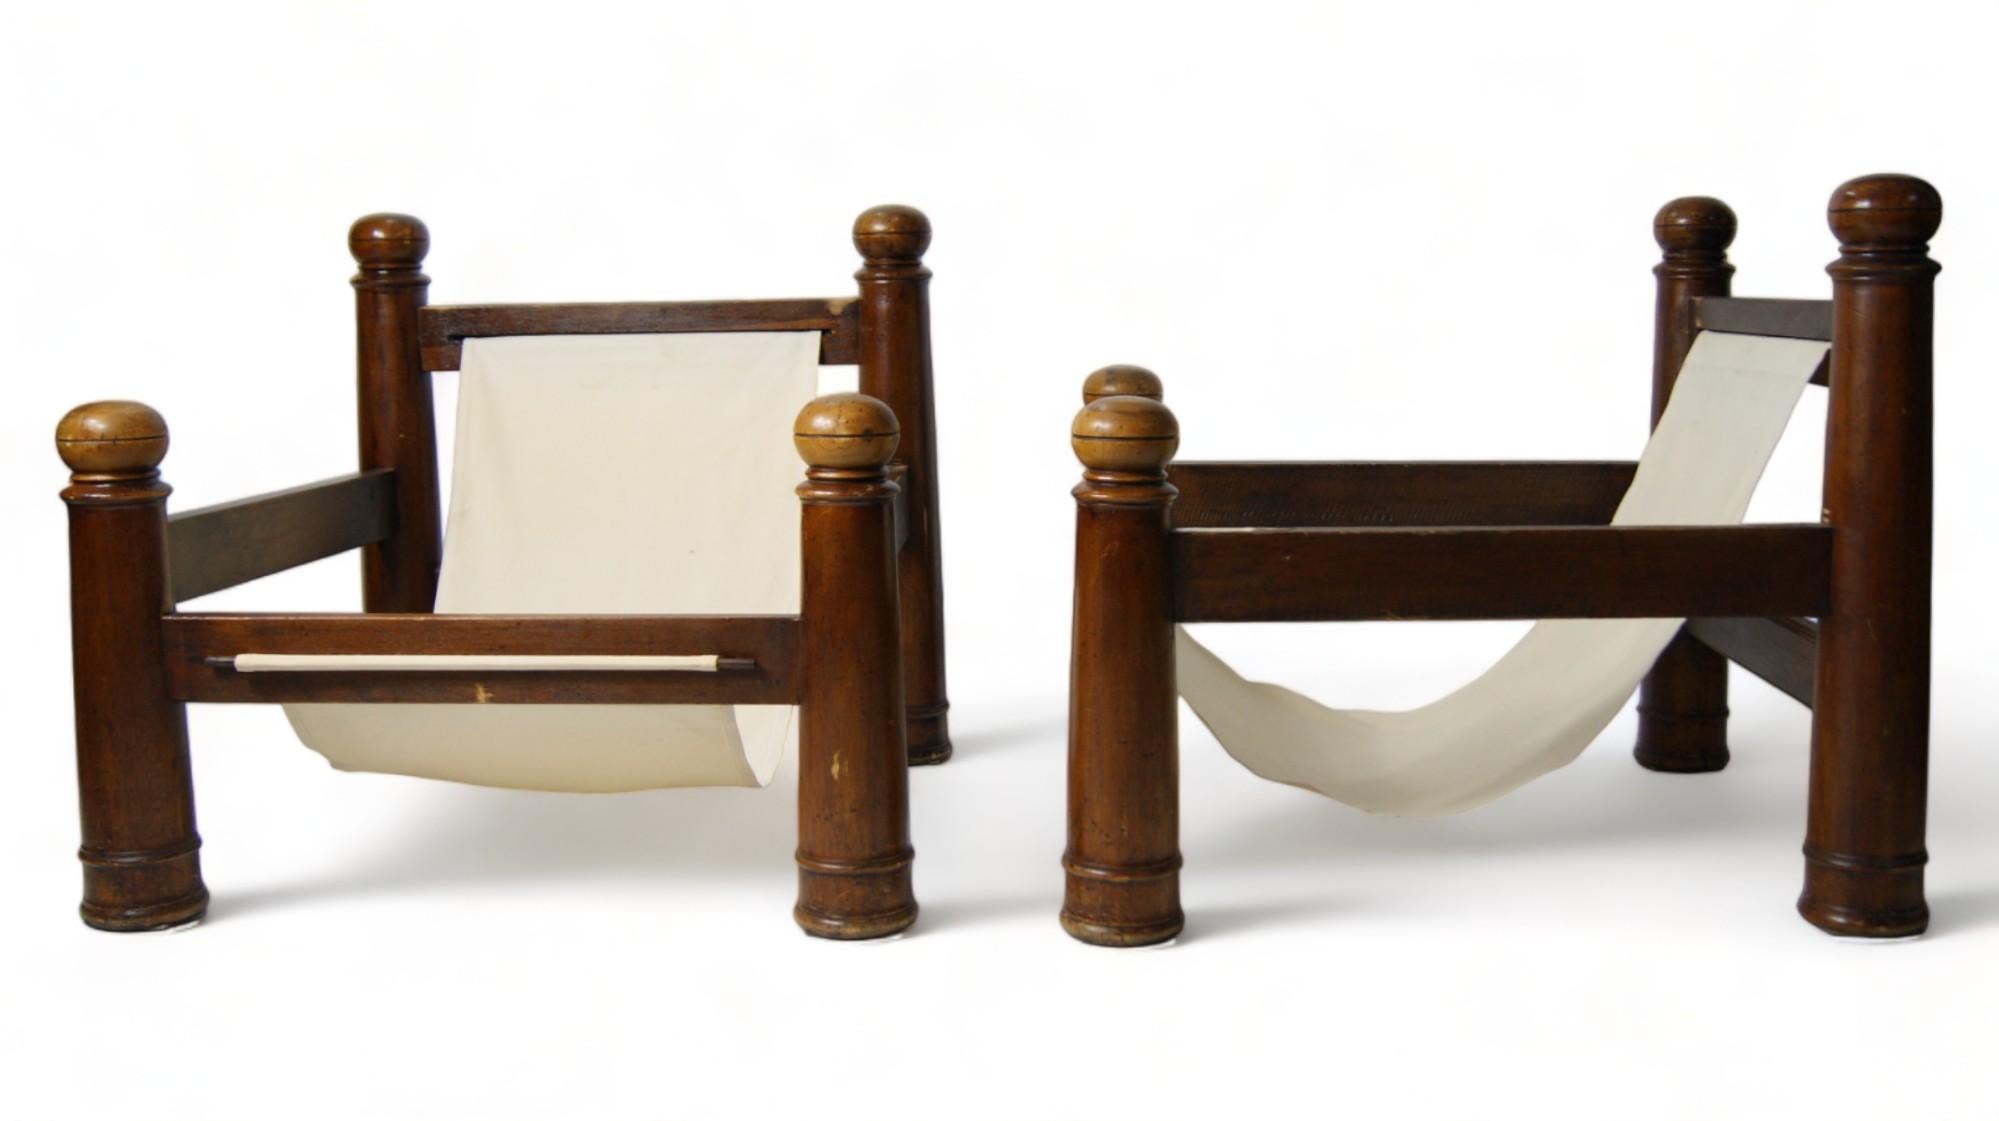 The large armchairs of the rare model designed by Charles Dudouyt are a true rarity that fuses sculptural art with functionality. Dudouyt, renowned for his distinctive approach to furniture design, has left an indelible mark on design history with